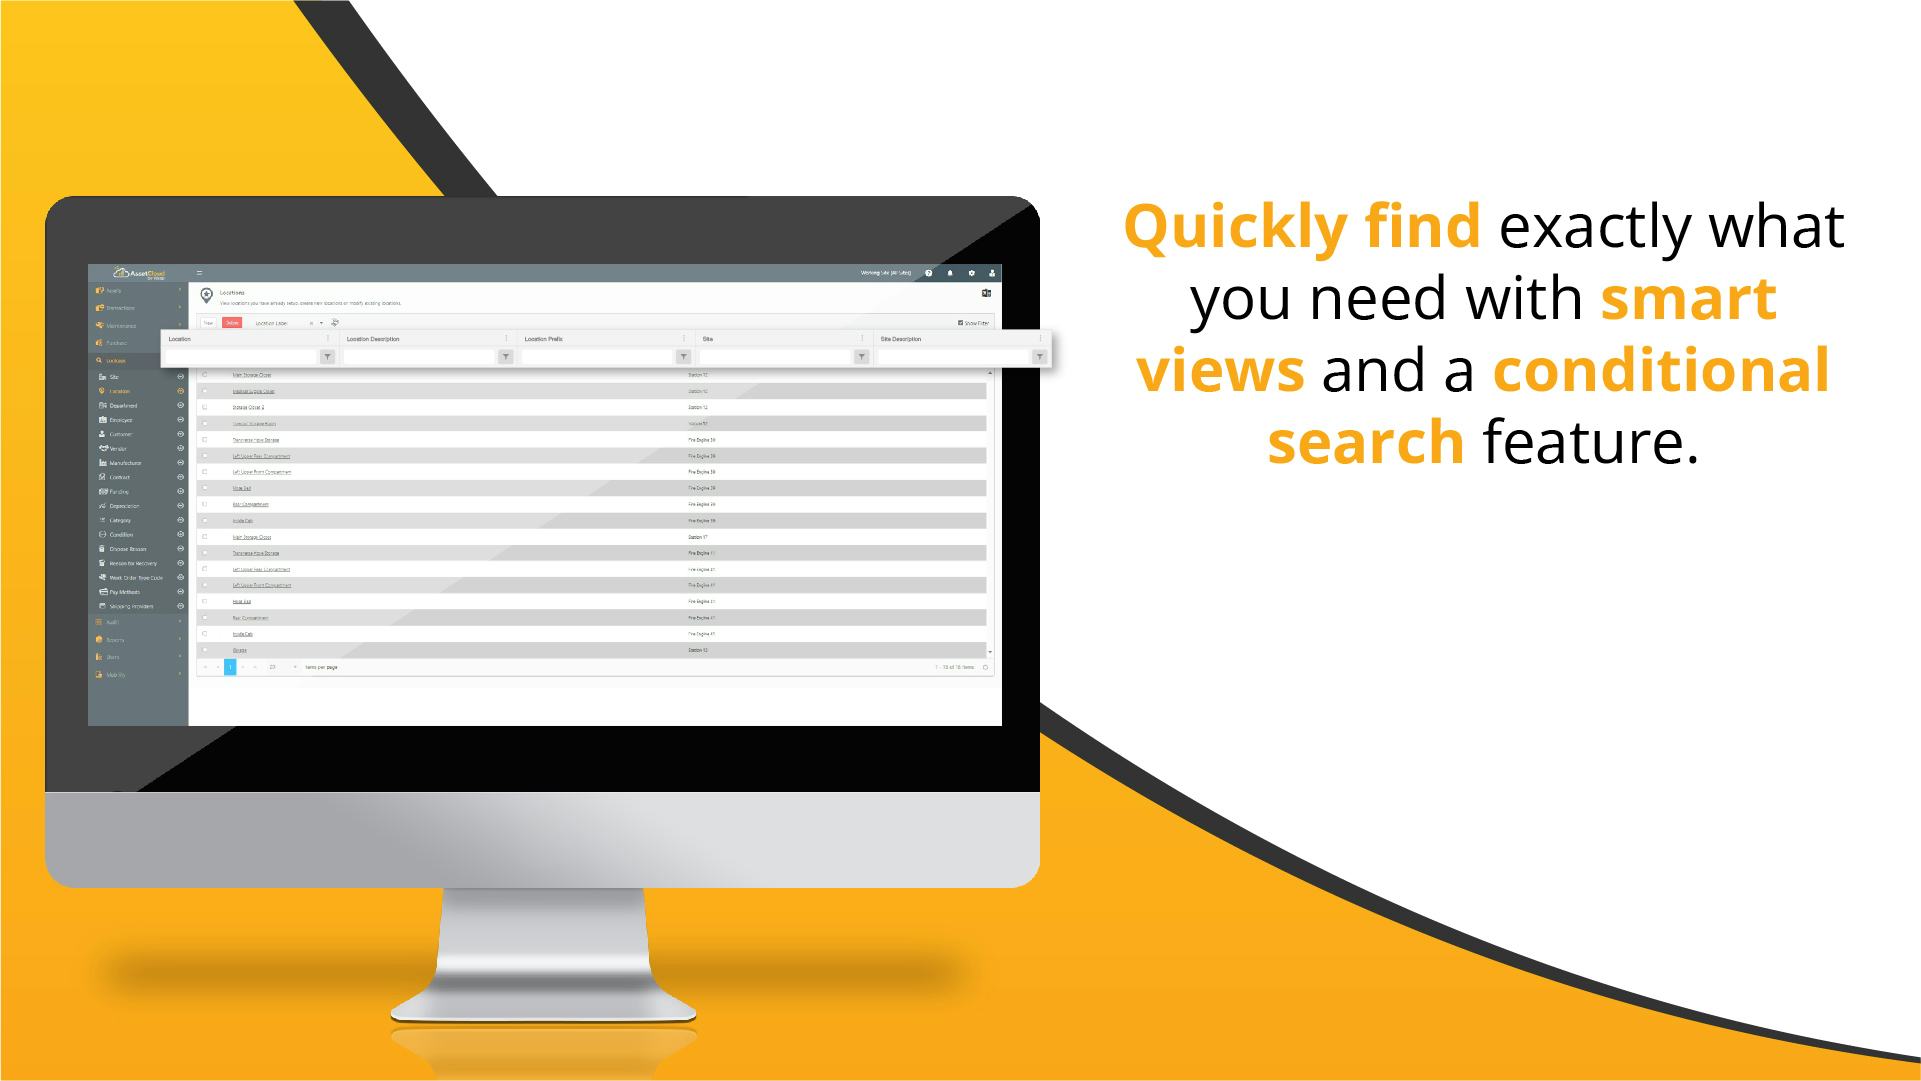 AssetCloud Software - Quickly find exactly what you need with smart views and a conditional search feature